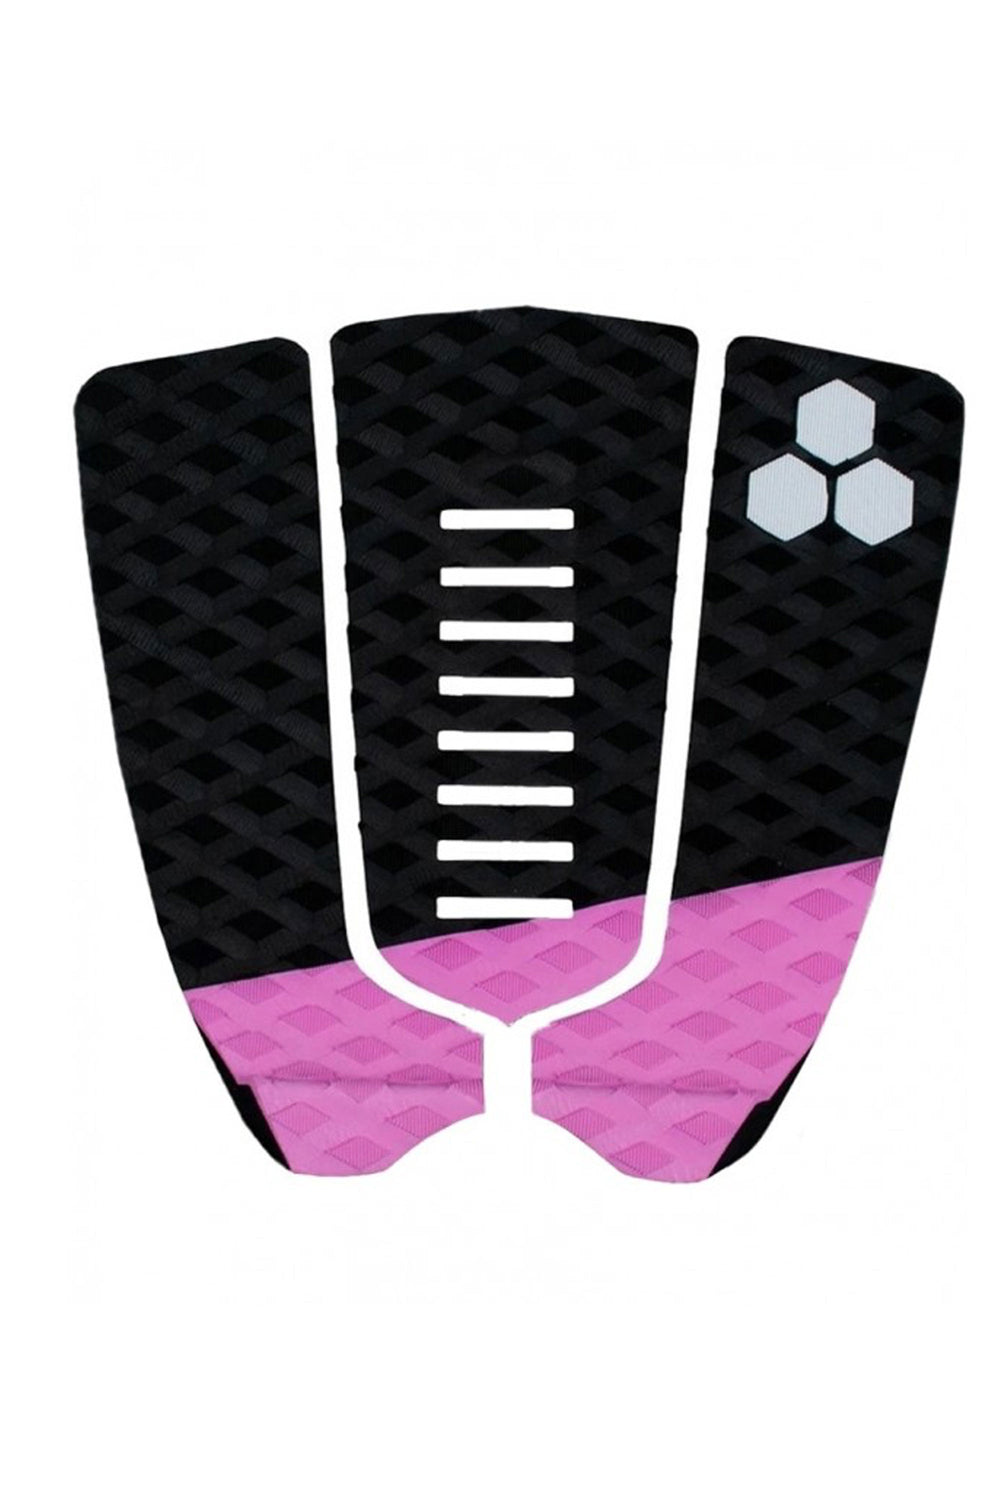 Pukas-Surf-Shop-grip-channel-islands-mixed-groove-3-piece-arch-traction-pad-black-pink